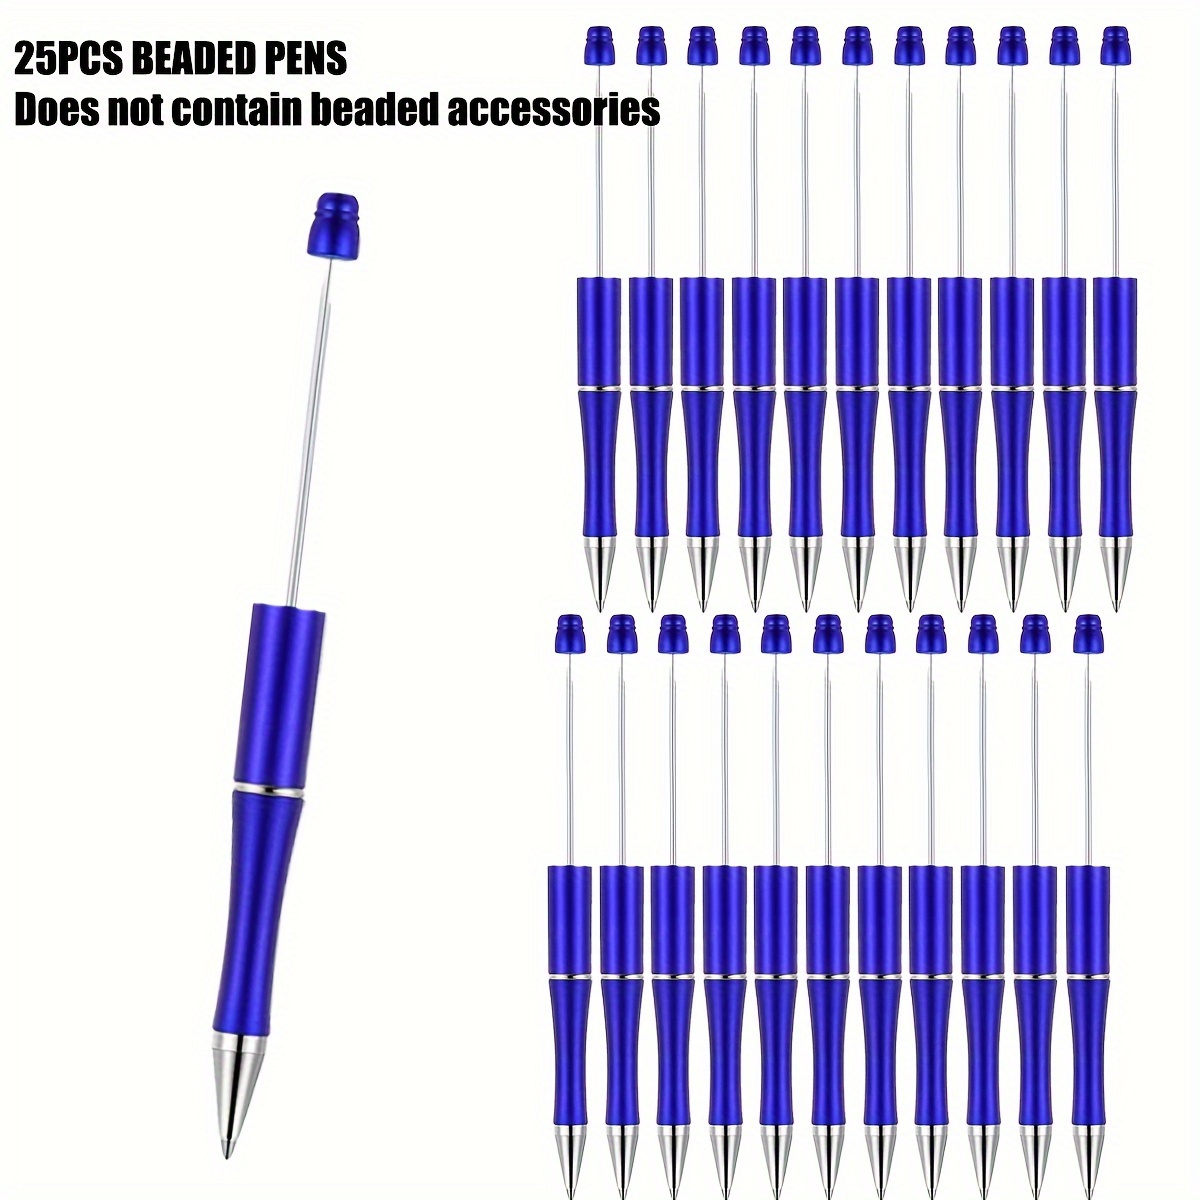 

25pcs Blue Beaded Pens For Writing Diaries, Holiday Gifts, Party Signing Pens For Friends, Souvenirs, Party Gifts Without Beading (0.5mm Black Ink)